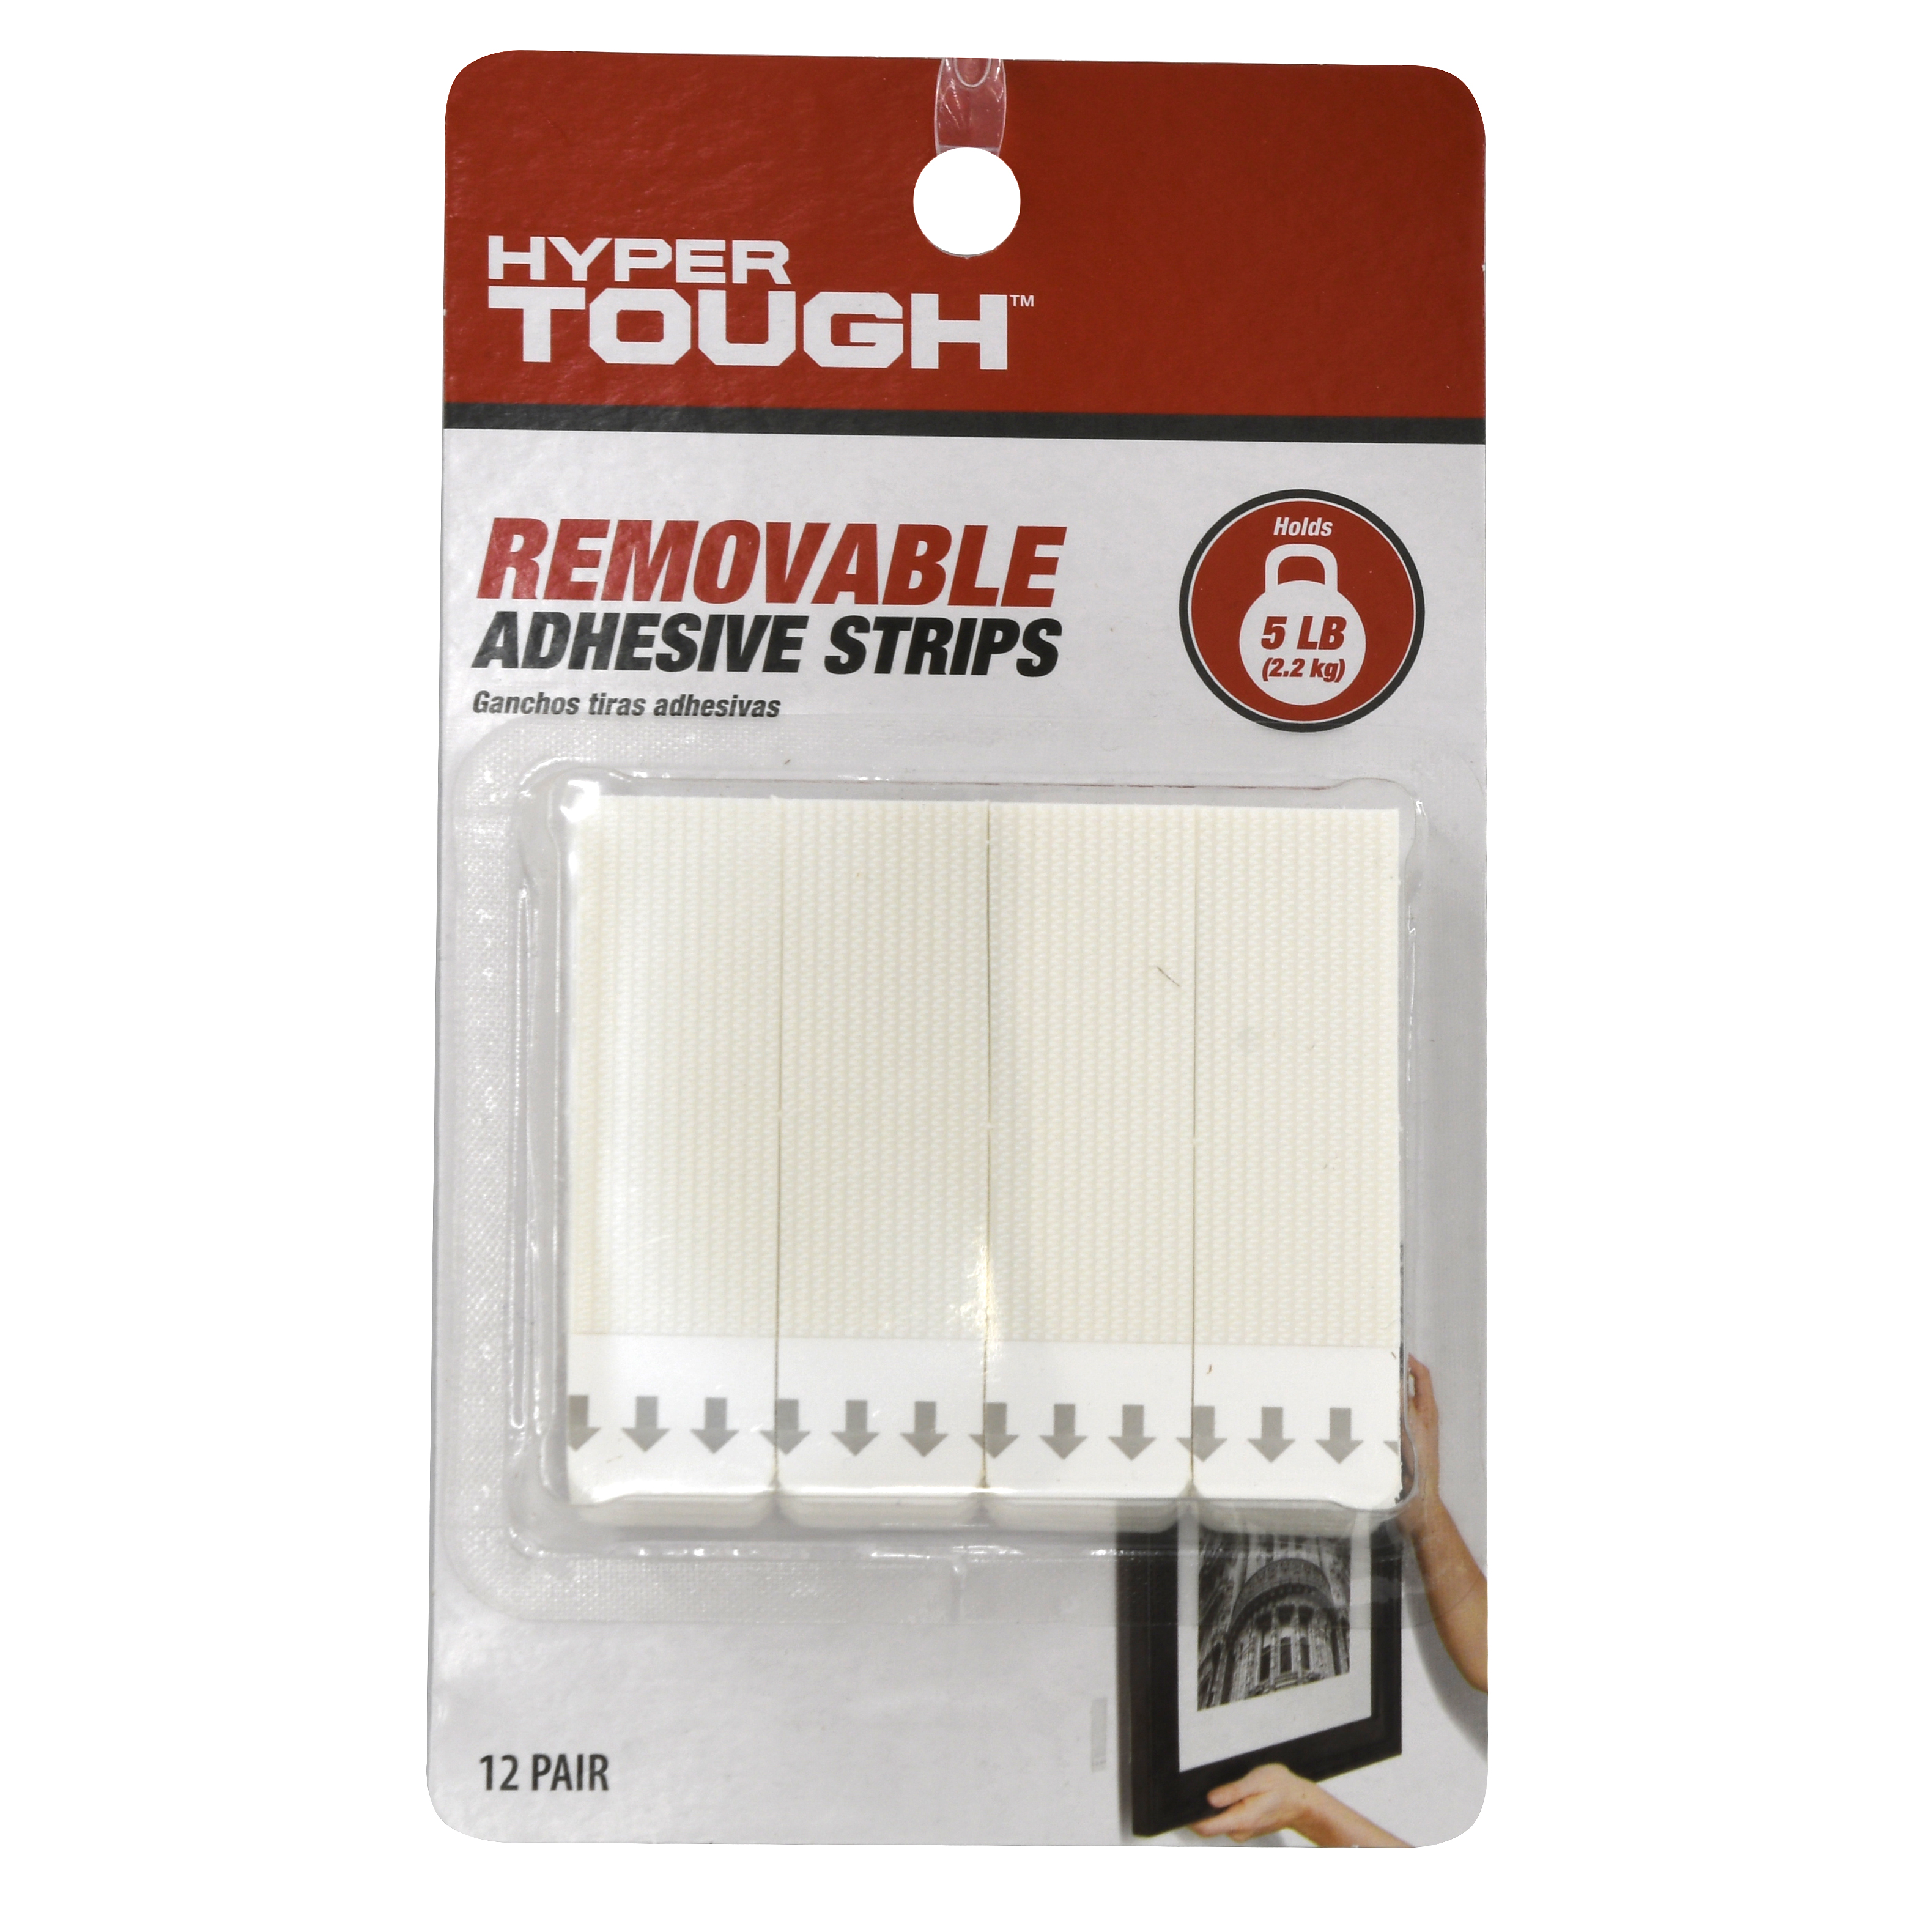 Hyper Tough Removable Adhesive Strips, Large, Holds up to 5 lb., 12 Pair, White - image 5 of 8